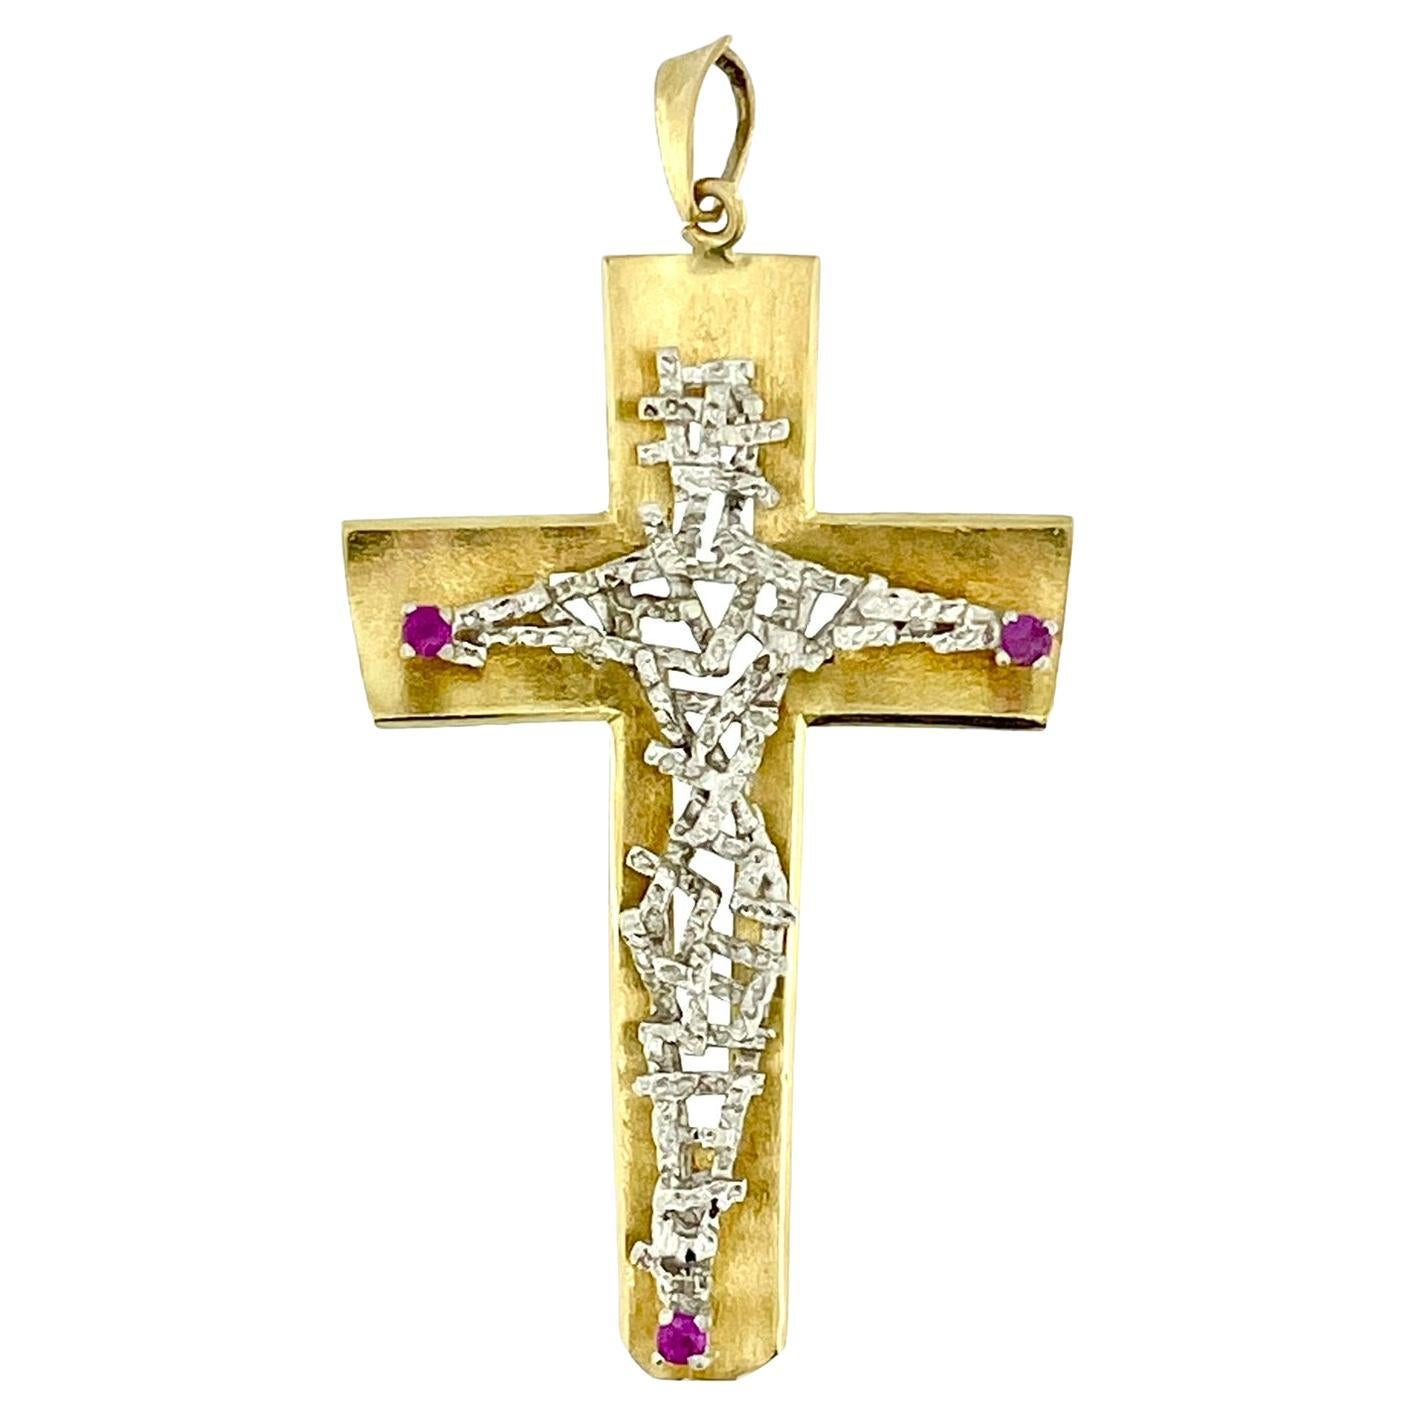 Hand-Made 18kt Gold Italian Crucifix with Rubies For Sale